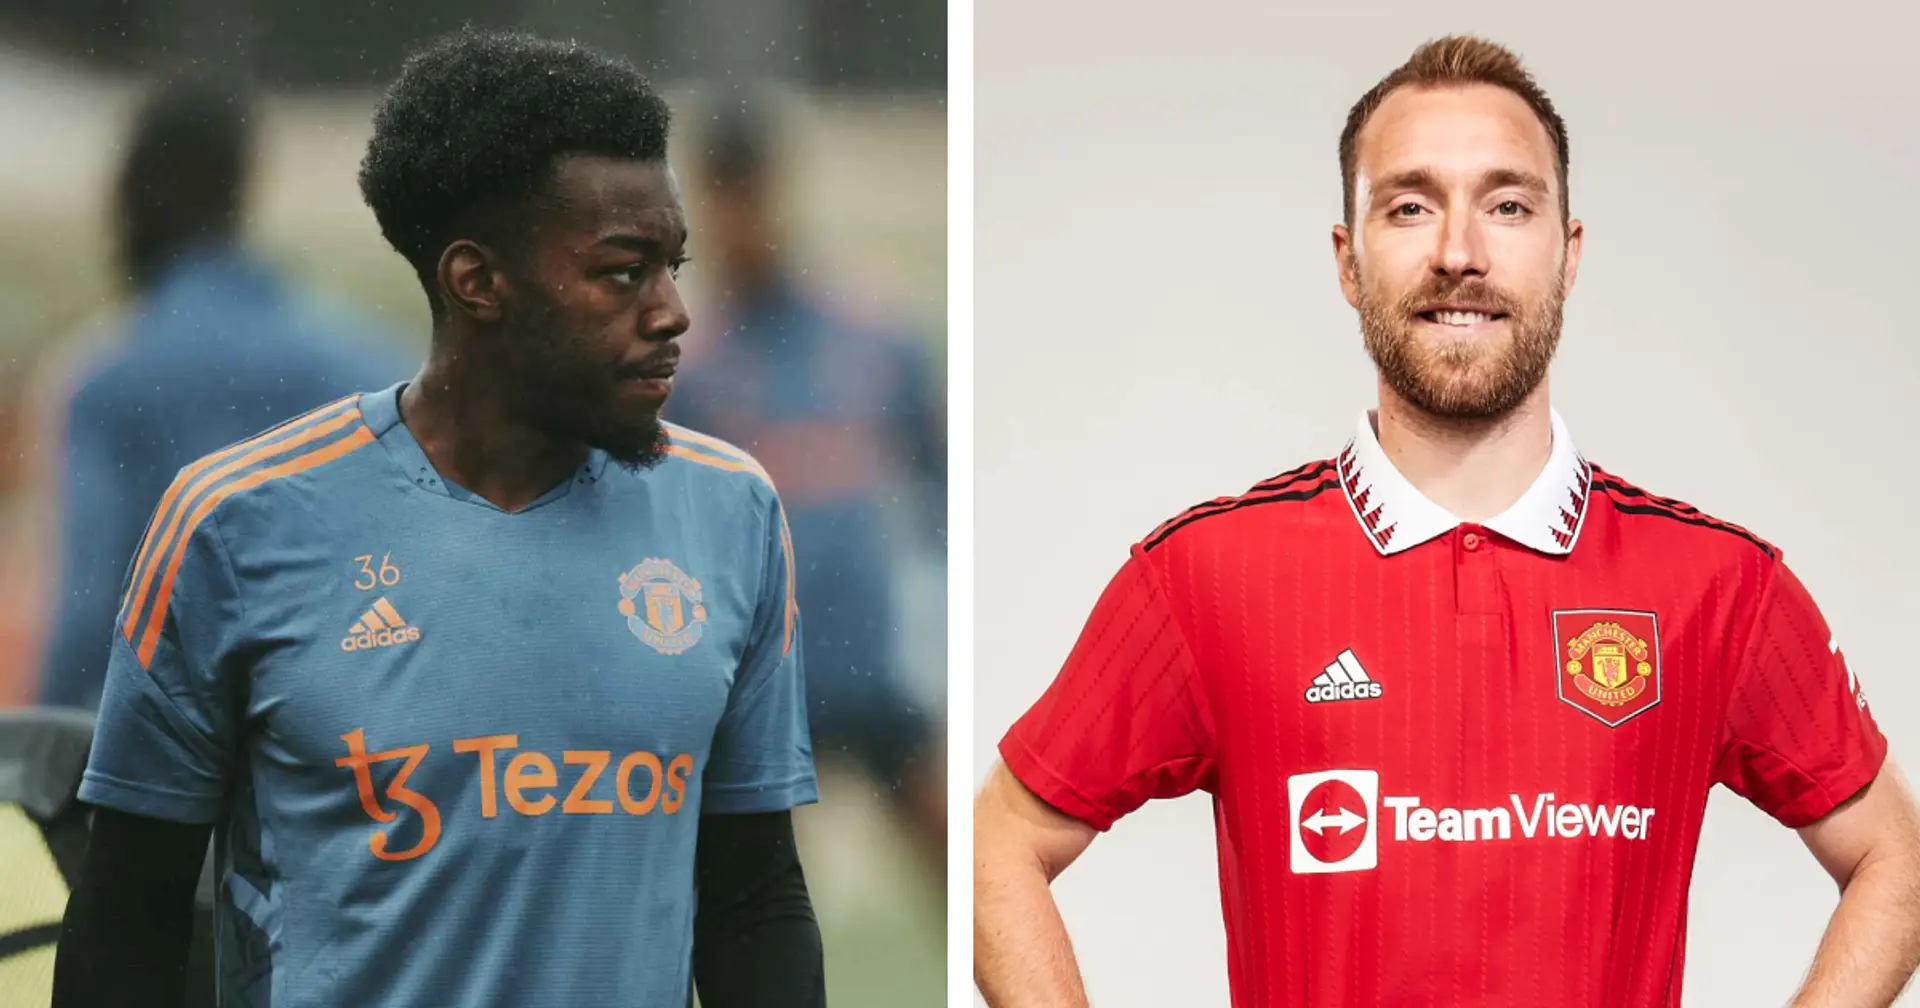 'That makes 3 of us!': Anthony Elanga welcomes 'another Scandinavian' Eriksen to Man United